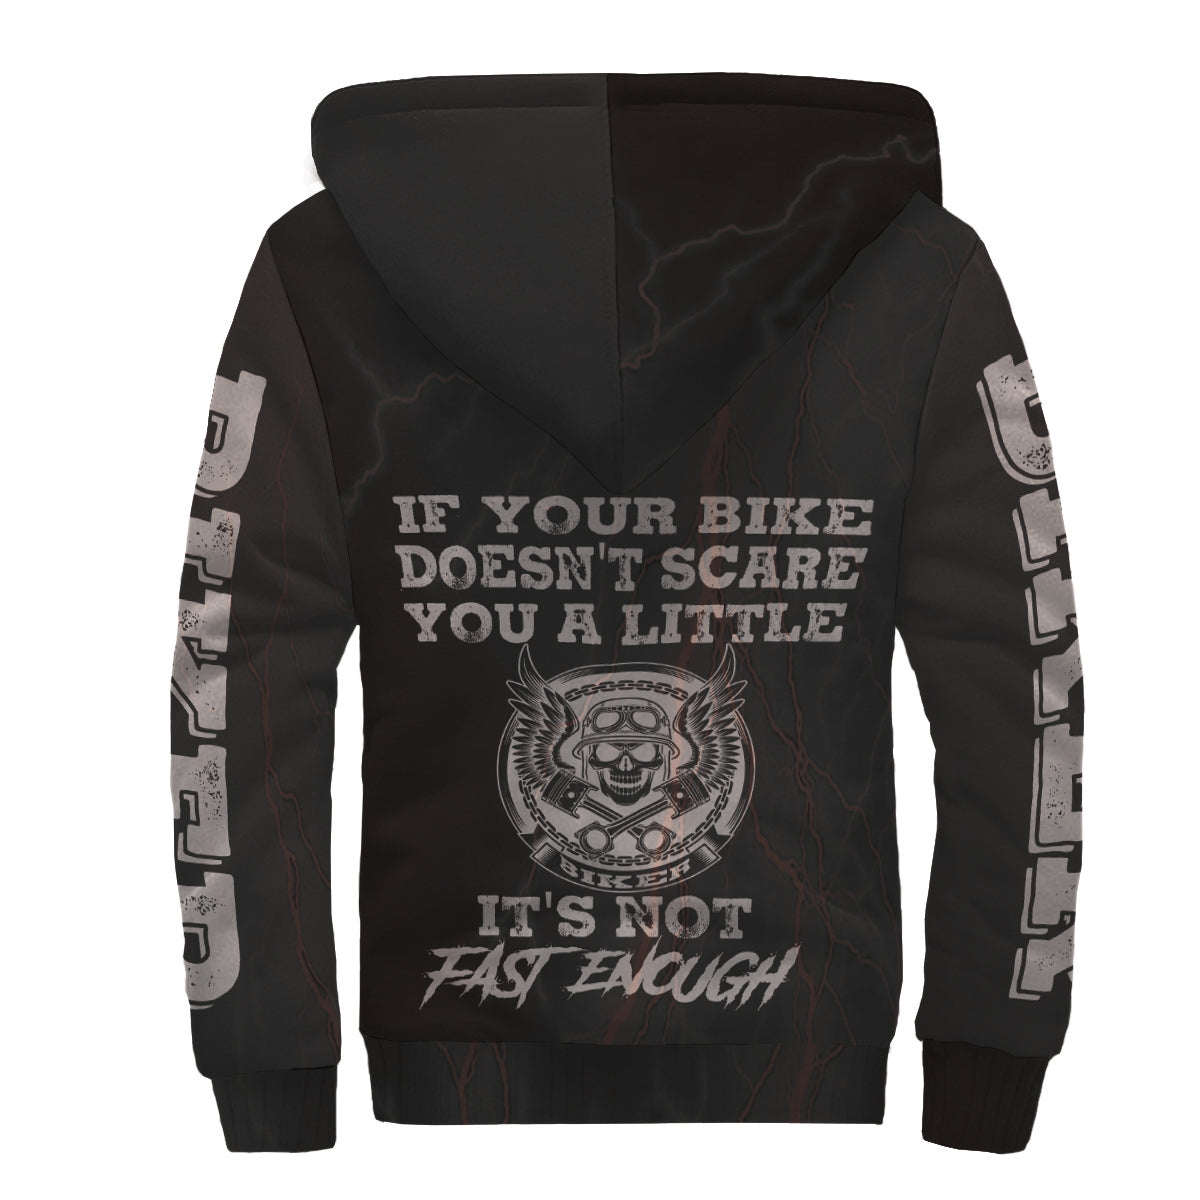 If Your Bike Doesn't Scare You It's Not Fast Enough Thunder Sherpa Jacket